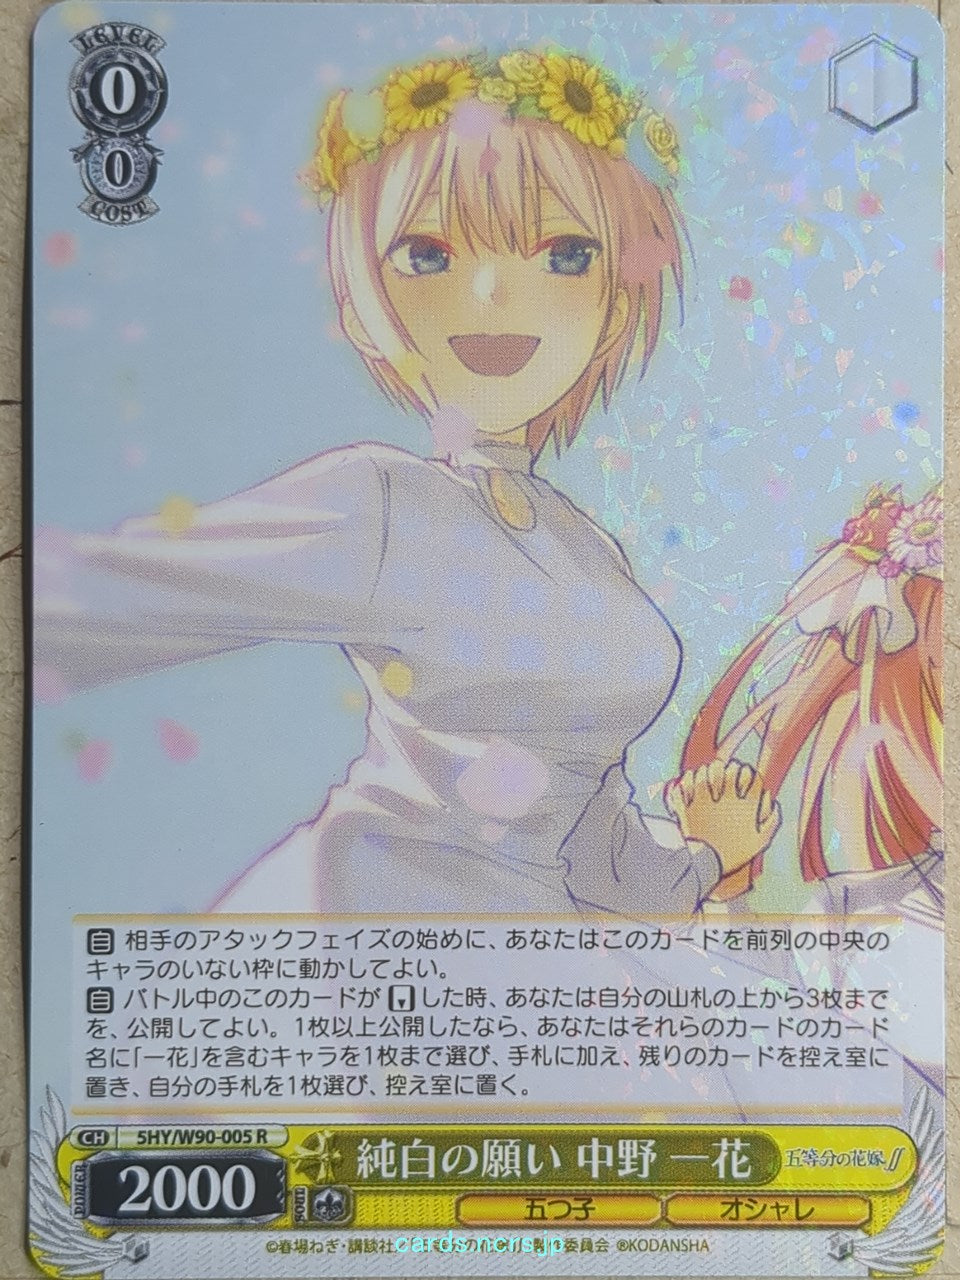 Weiss Schwarz The Quintessential Quintuplets -Ichika Nakano-   Trading Card 5HY/W90-005R